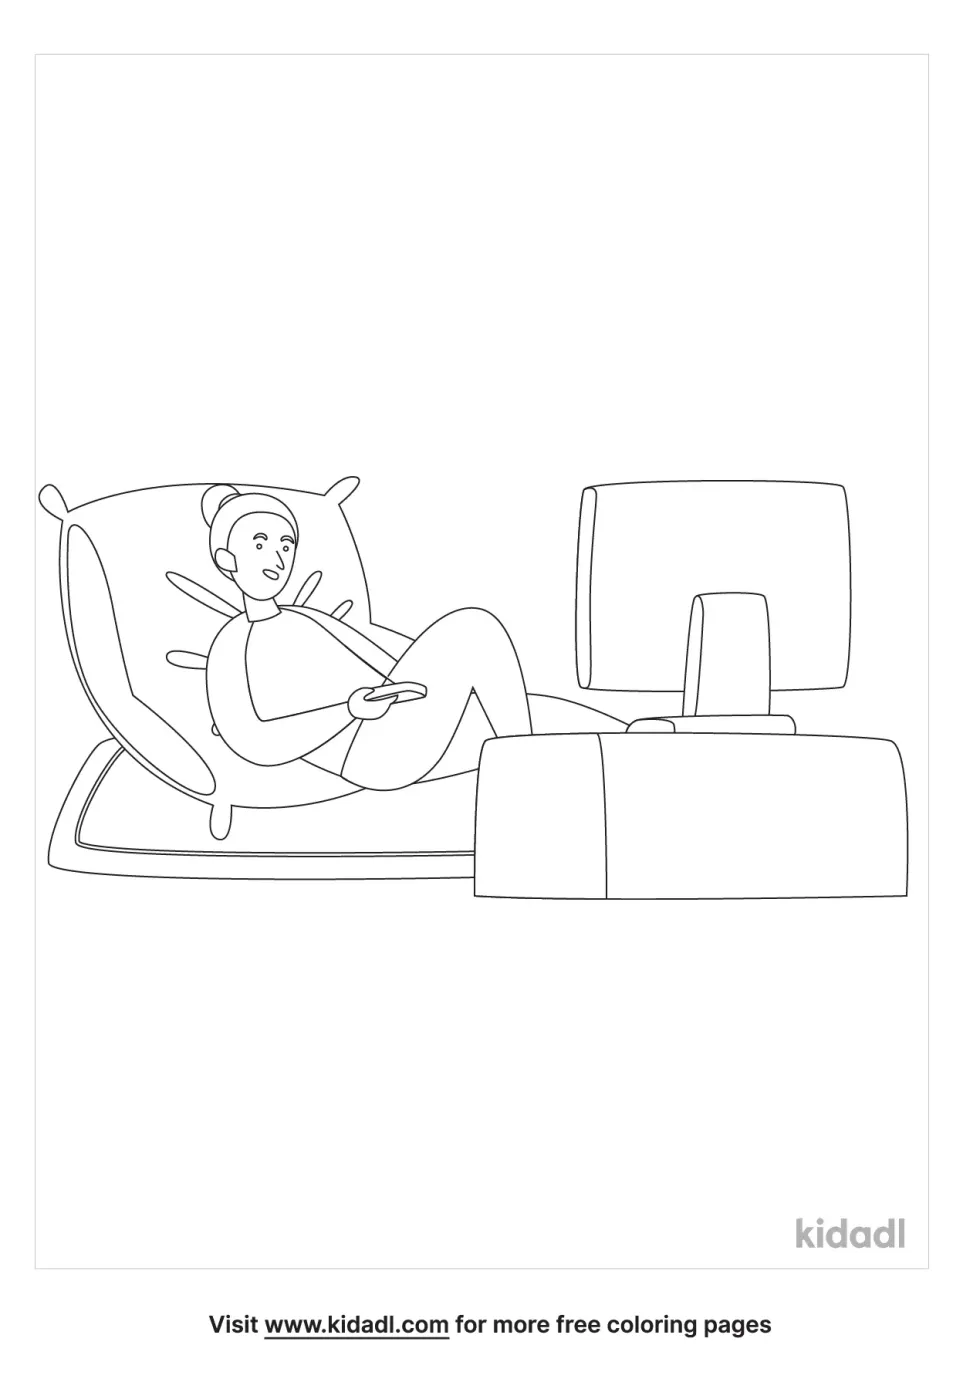 Watching Tv Coloring Page